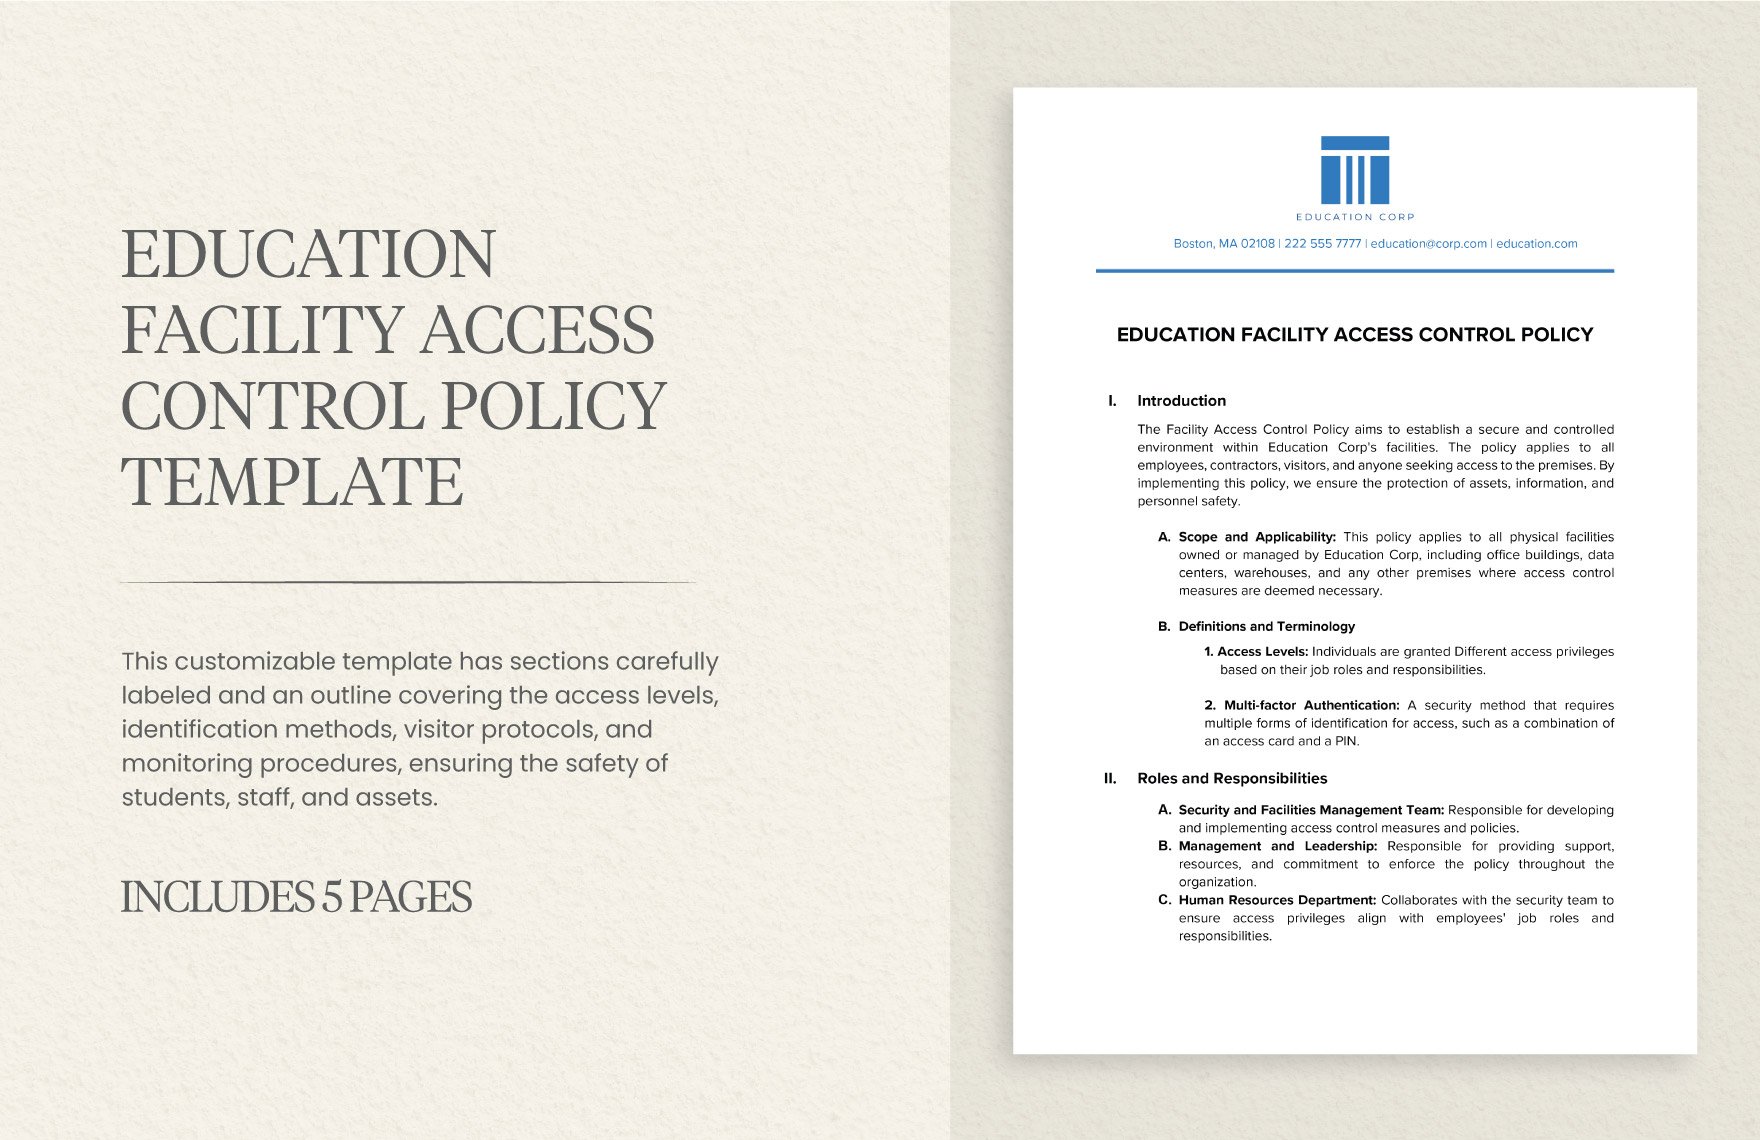 Education Facility Access Control Policy Template